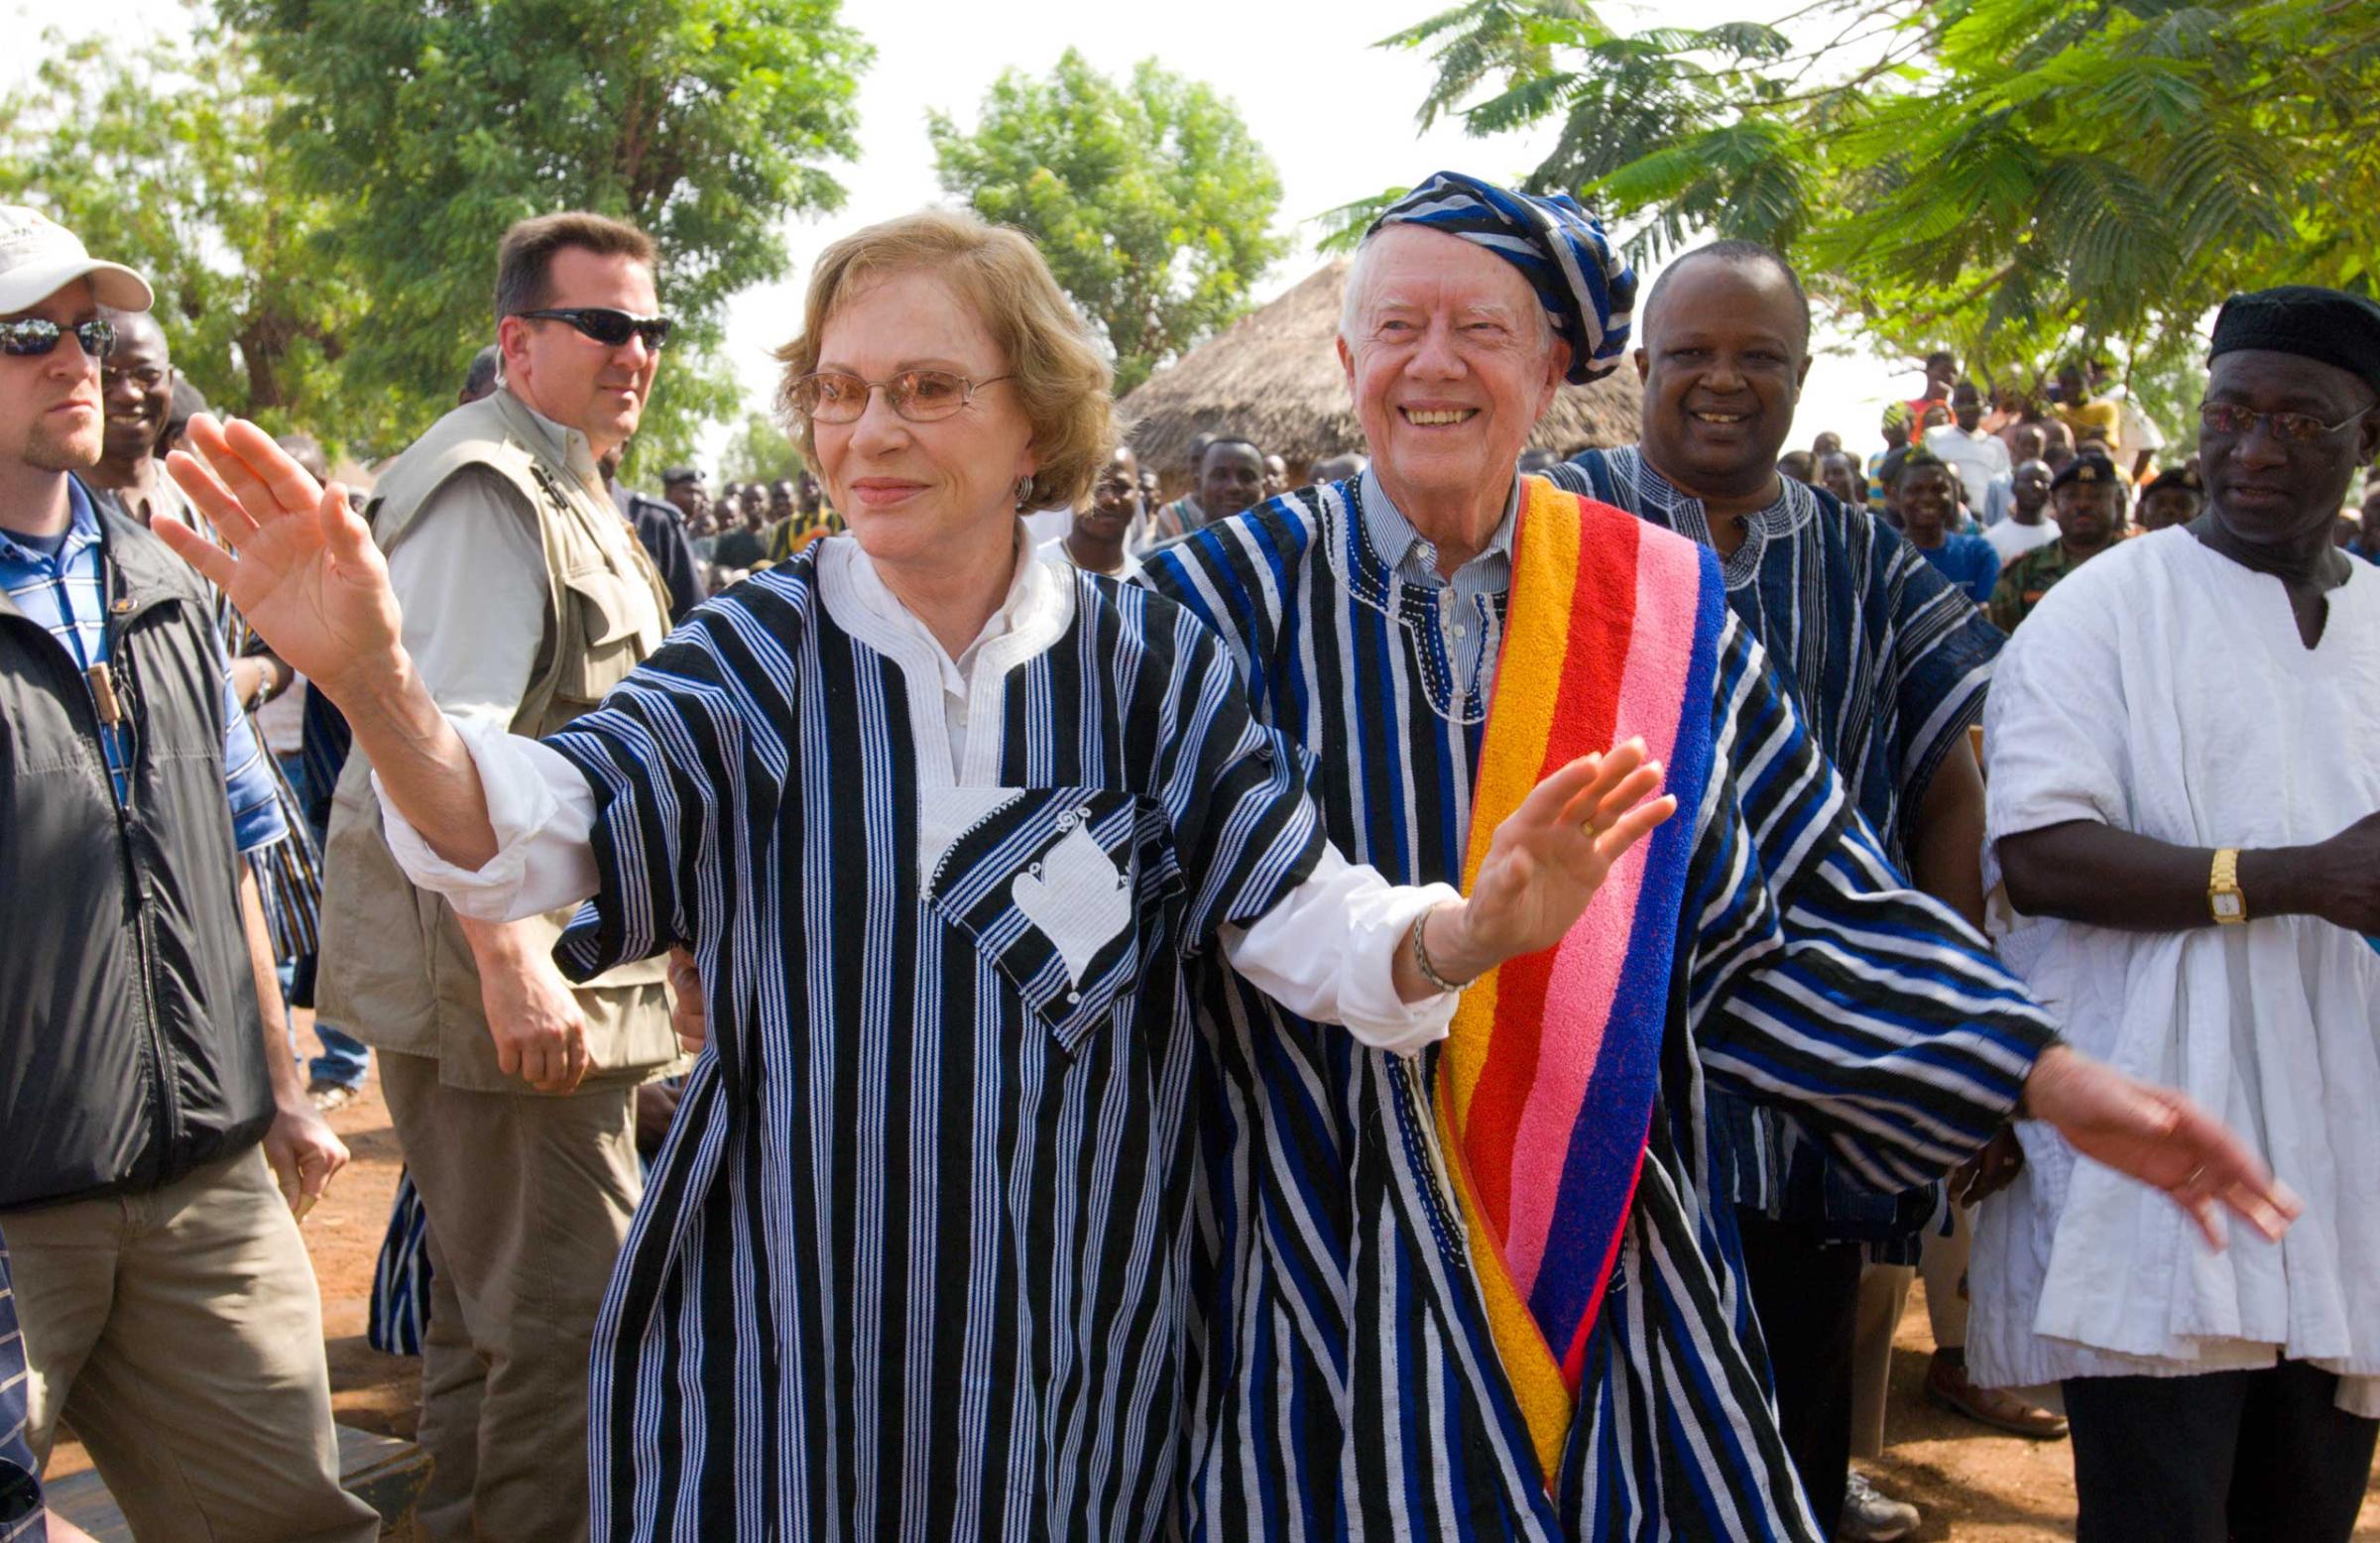 February 8, 2007. Tingoli Village, Northern Province, Ghana. President Jimmy Carter and his wife Rosalynn are honored by the Dagumba people of Tingoli with a gift of traditional attire, which they wear with joy.